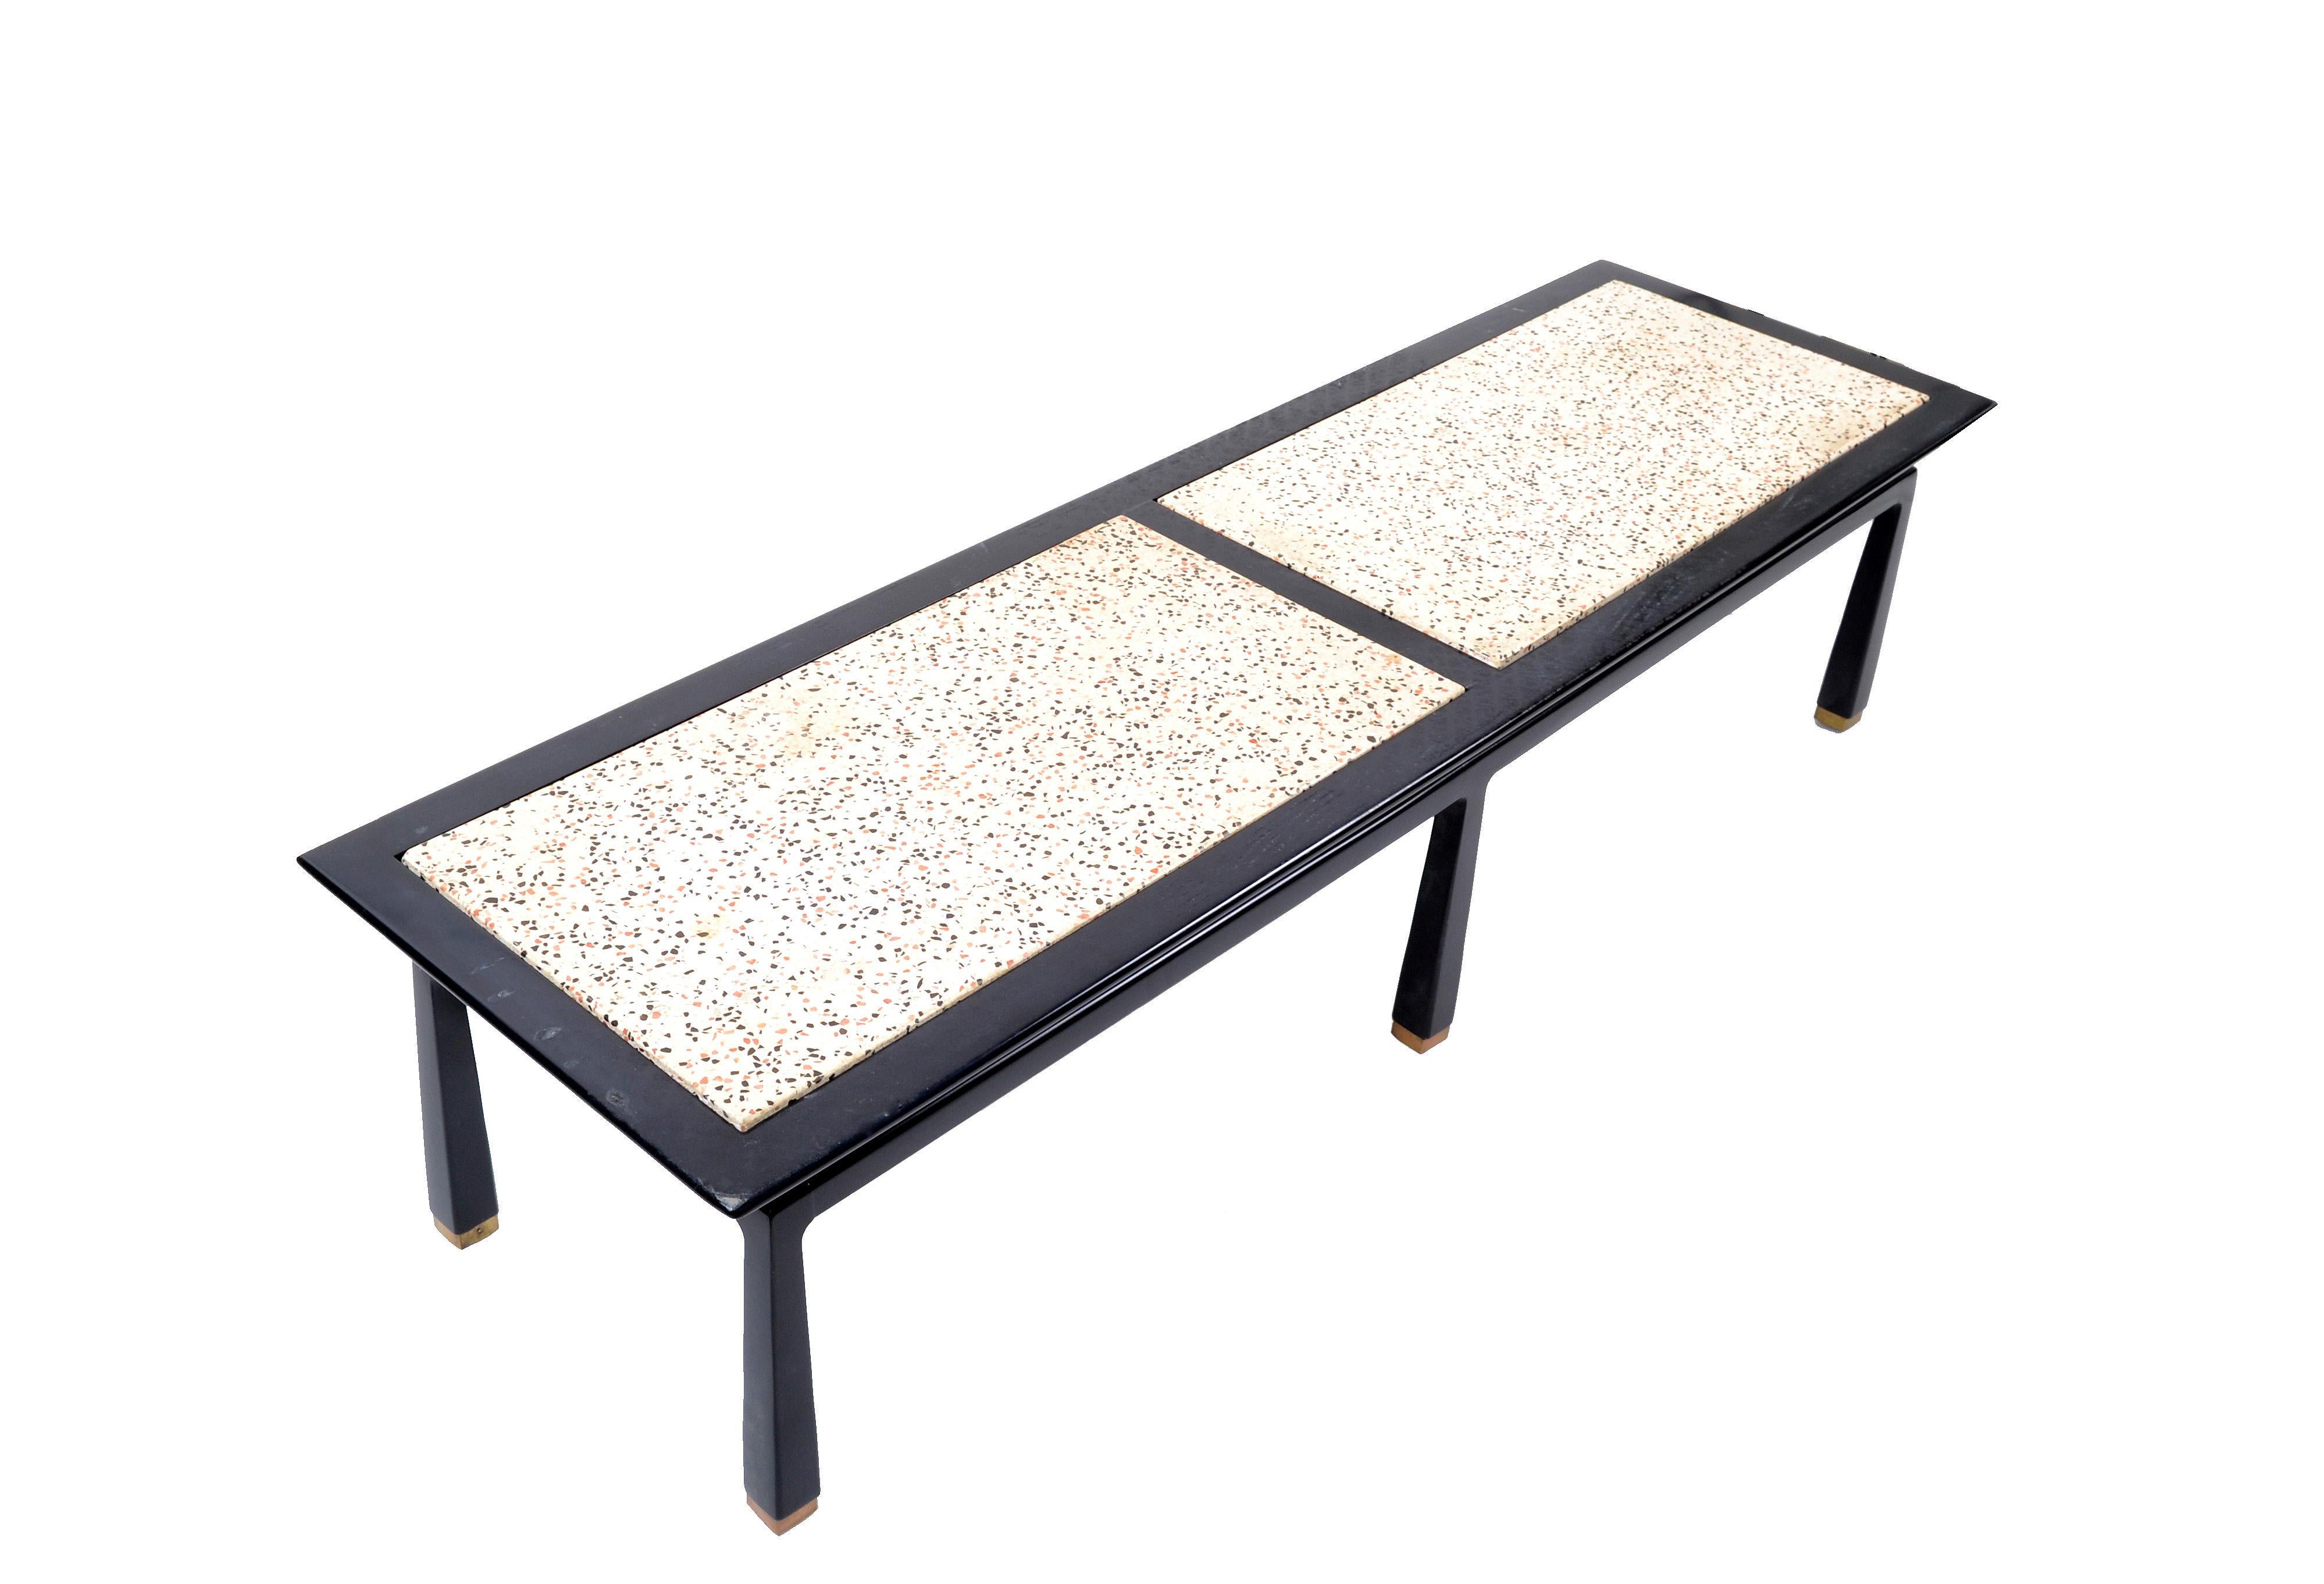 Chinoiserie inspired Mid-Century Modern rectangular coffee table by Harvey Probber.
The table features a wooden frame with two heavy travertine tops.
The legs have brass covers.
Lovely 1970s Asian influenced style which fits to many interior